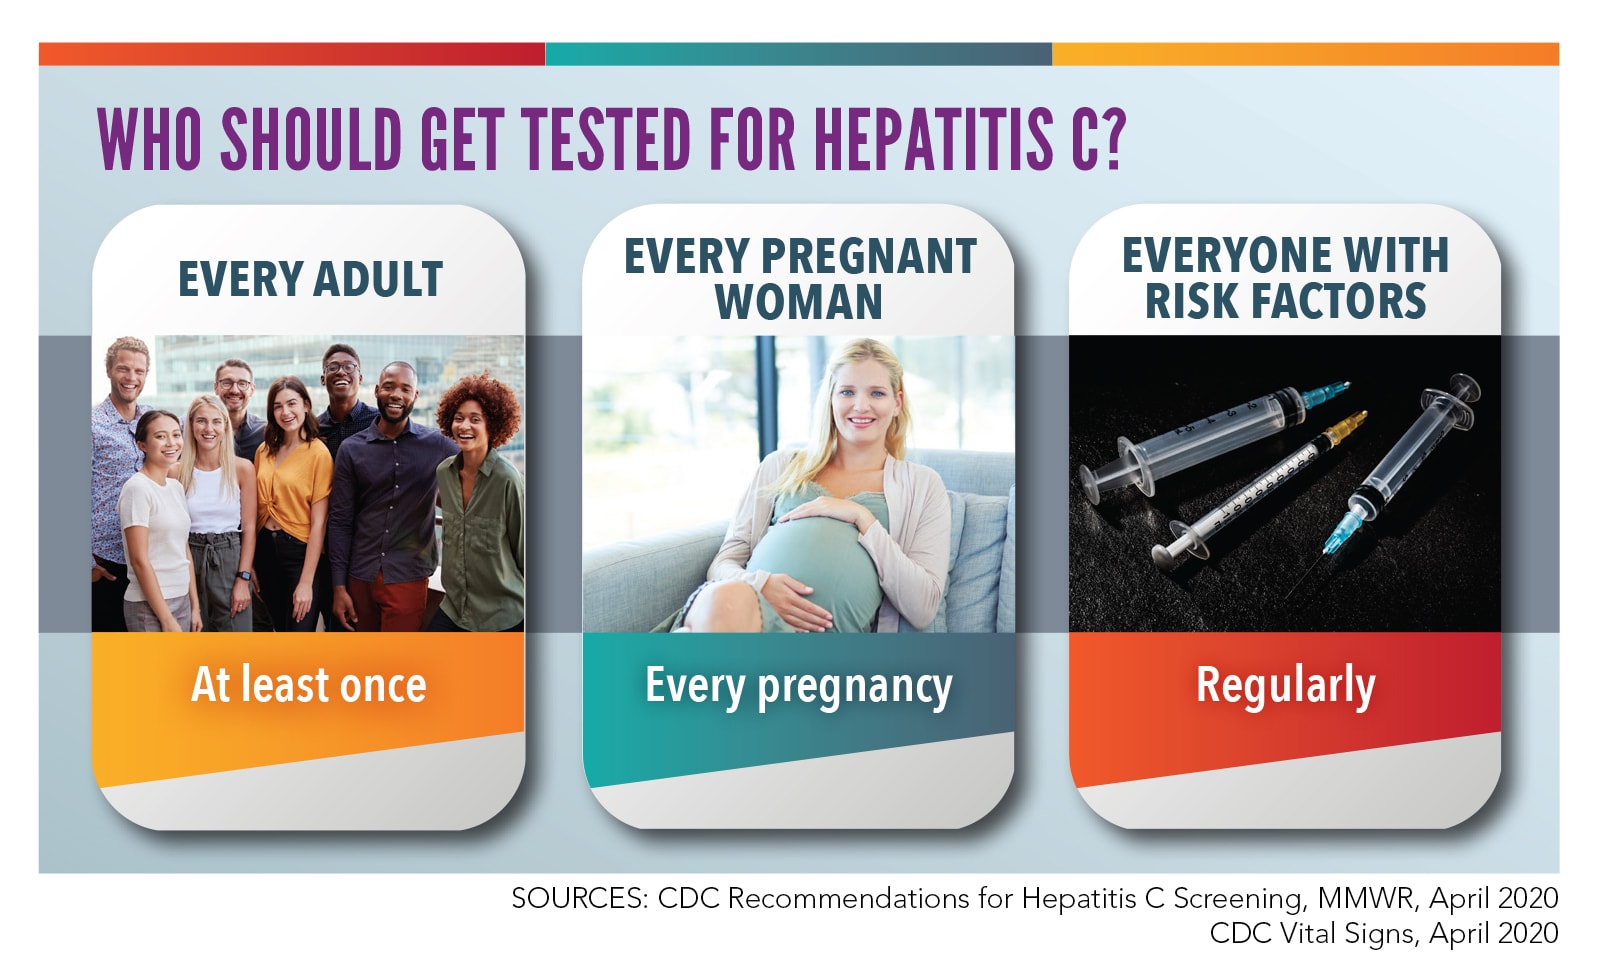 Examples of groups of people who should get tested for hepatitis C